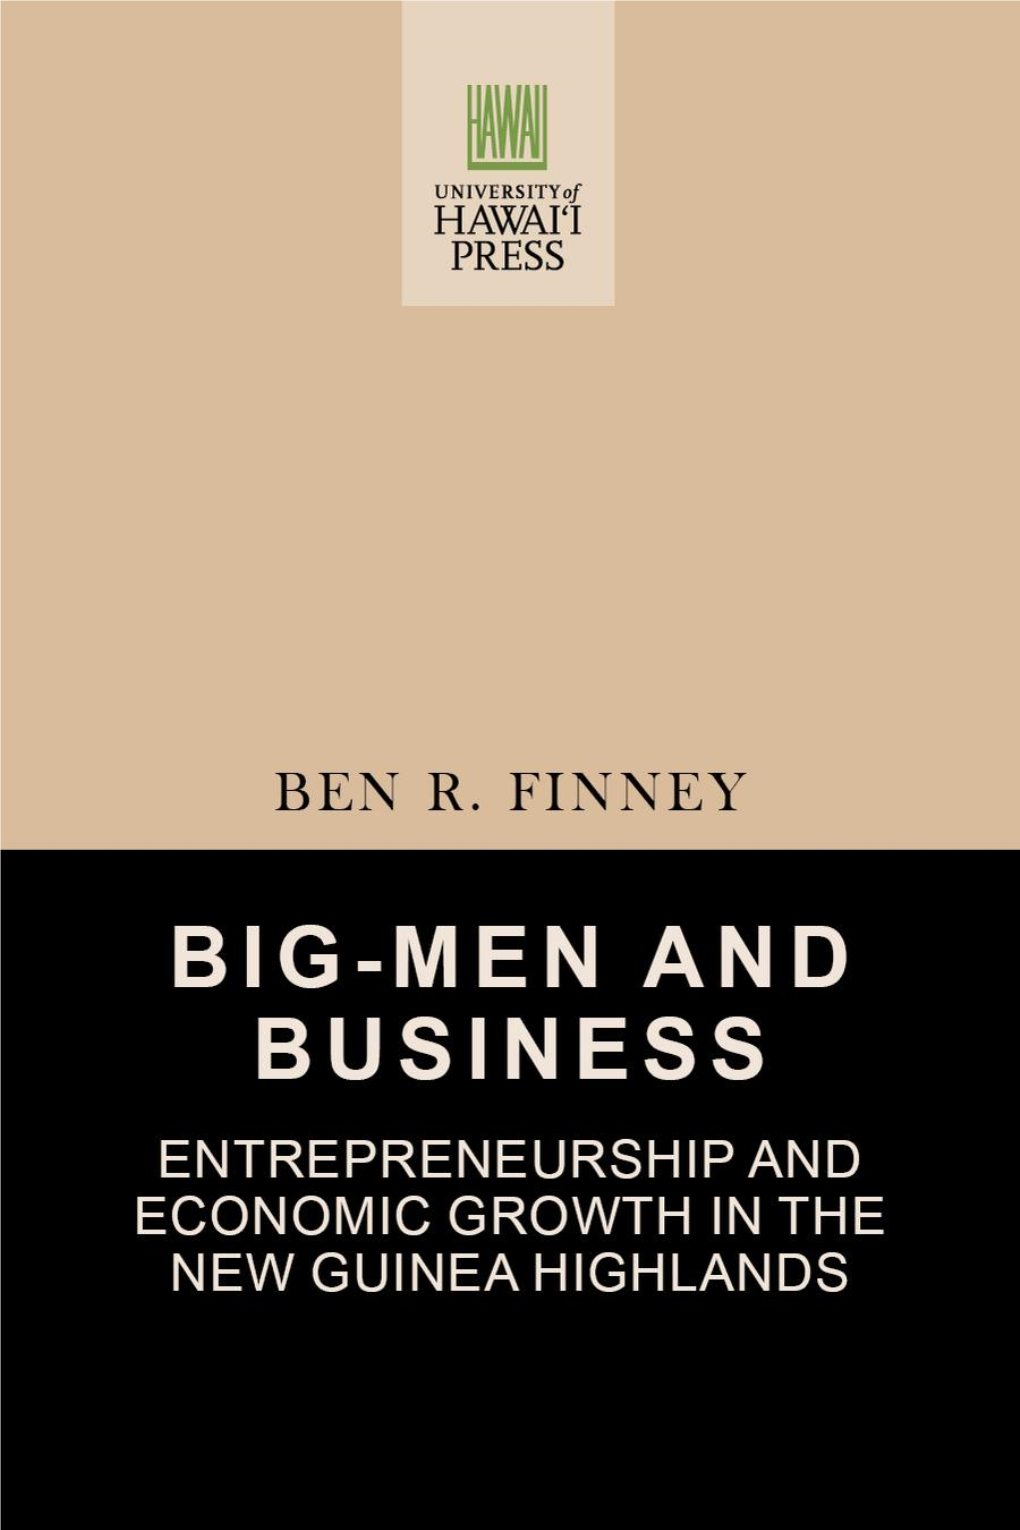 Big-Men and Business: Entrepreneurship and Economic Growth in the New Guinea Highlands